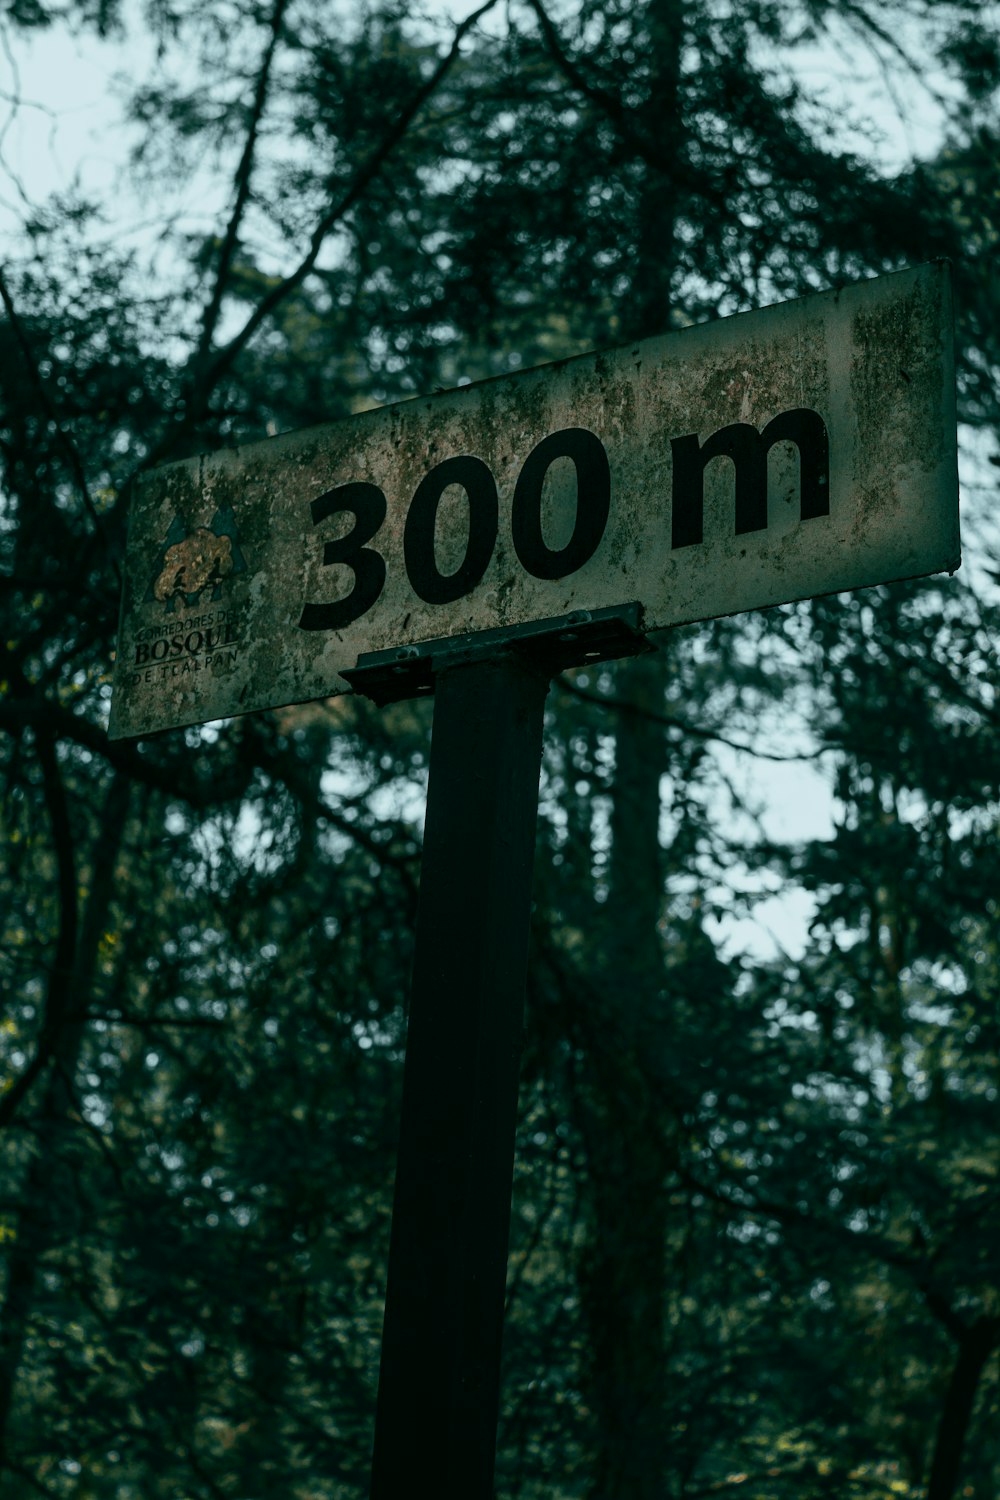 a street sign in front of trees